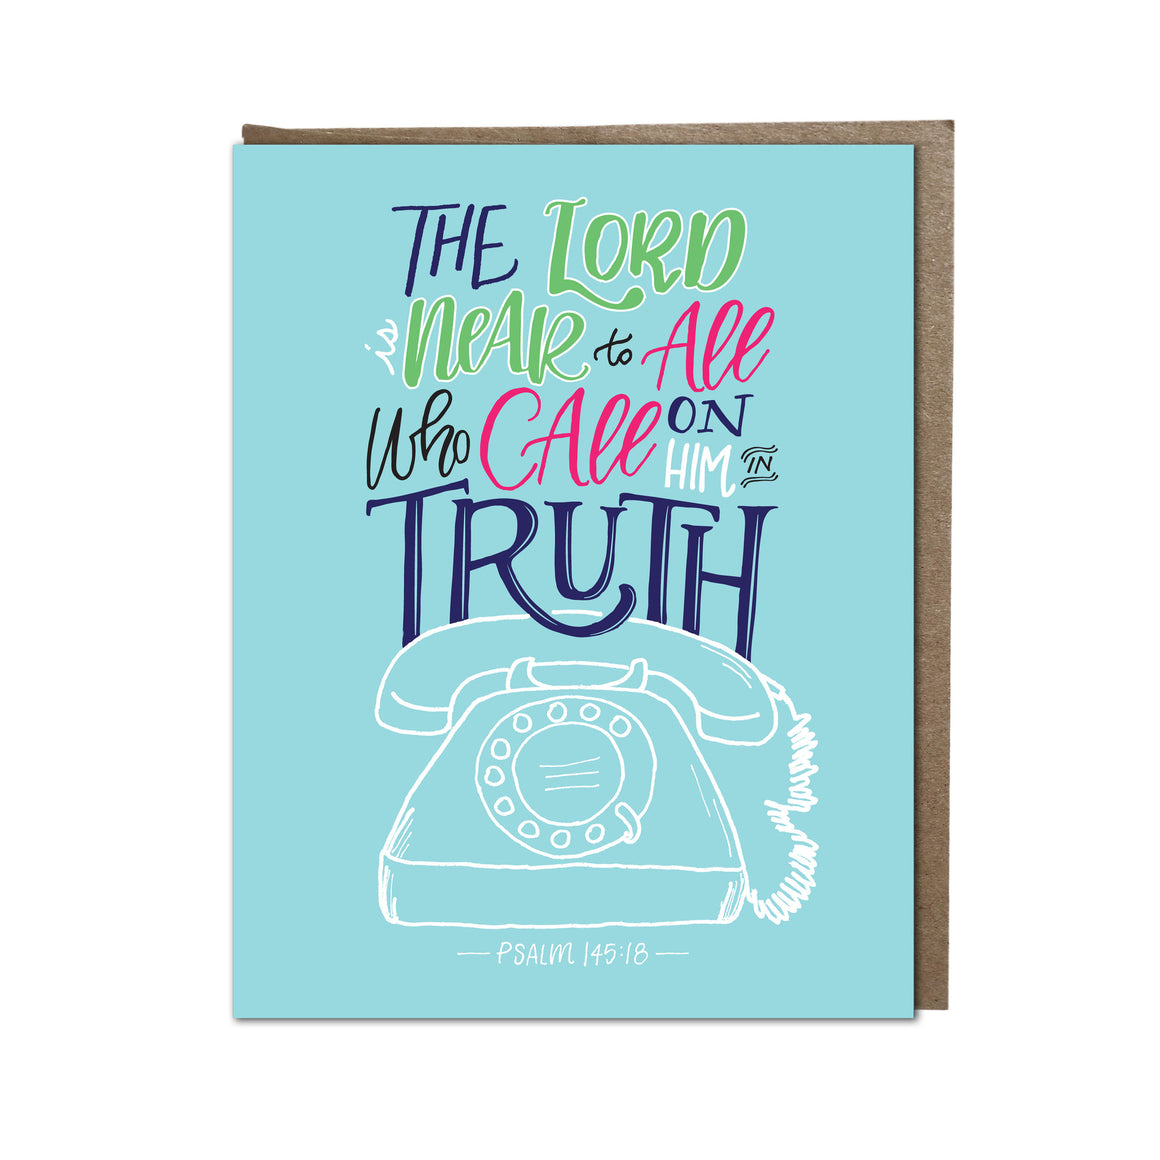 "Call on Him in truth" card